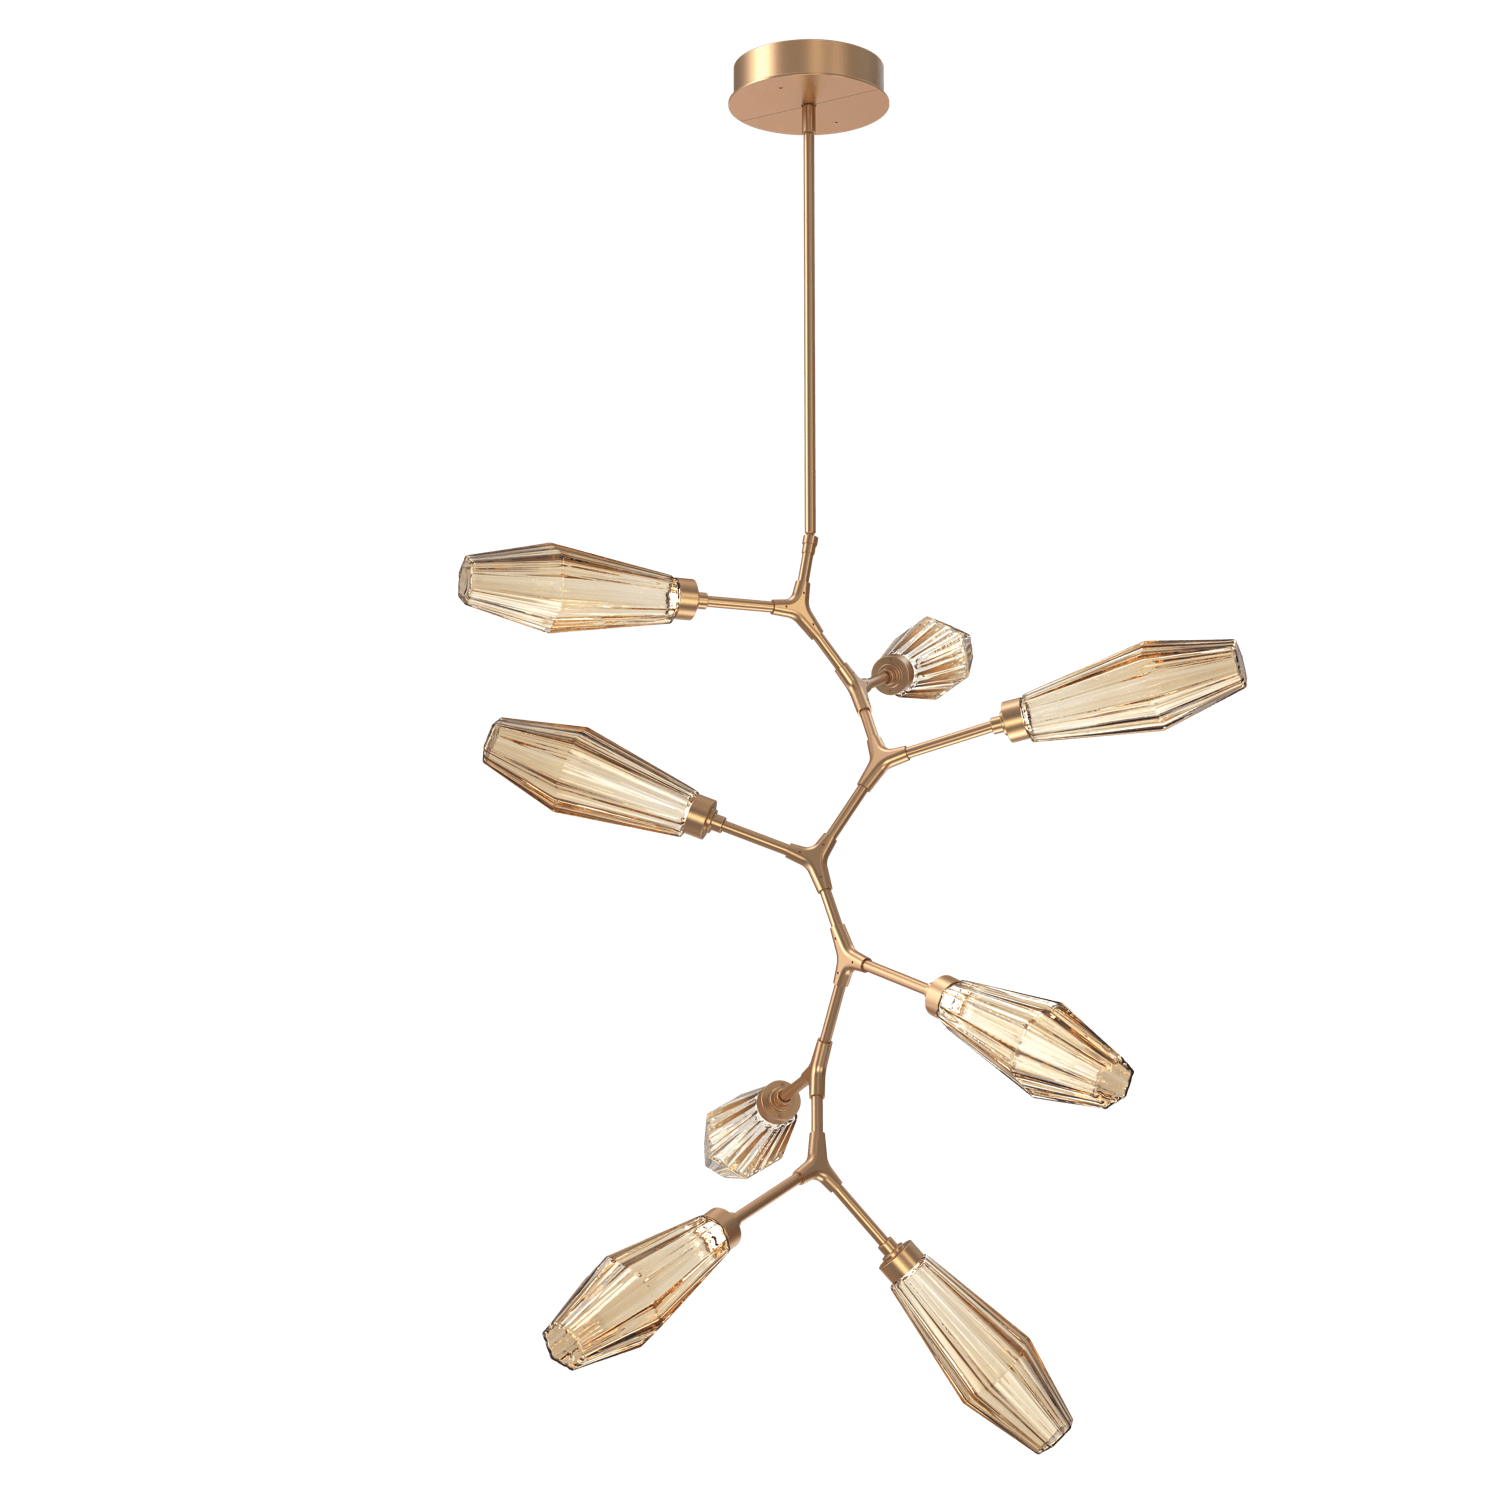 CHB0049-VB-NB-RB-Hammerton-Studio-Aalto-8-light-modern-vine-chandelier-with-novel-brass-finish-and-optic-ribbed-bronze-glass-shades-and-LED-lamping